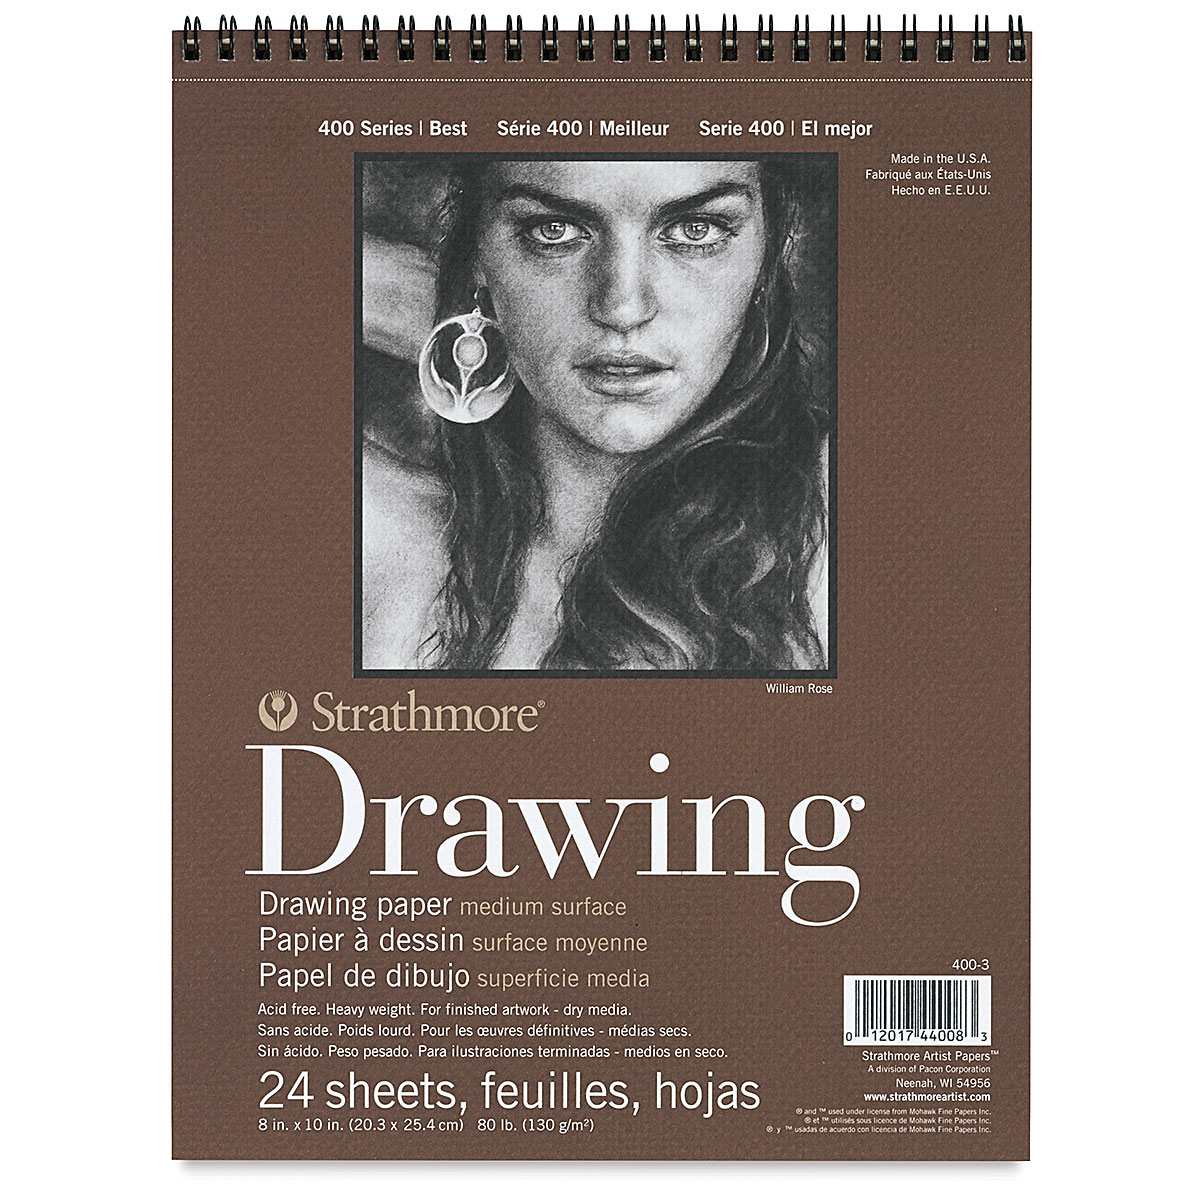 The Best Drawing Paper for Realistic Drawing